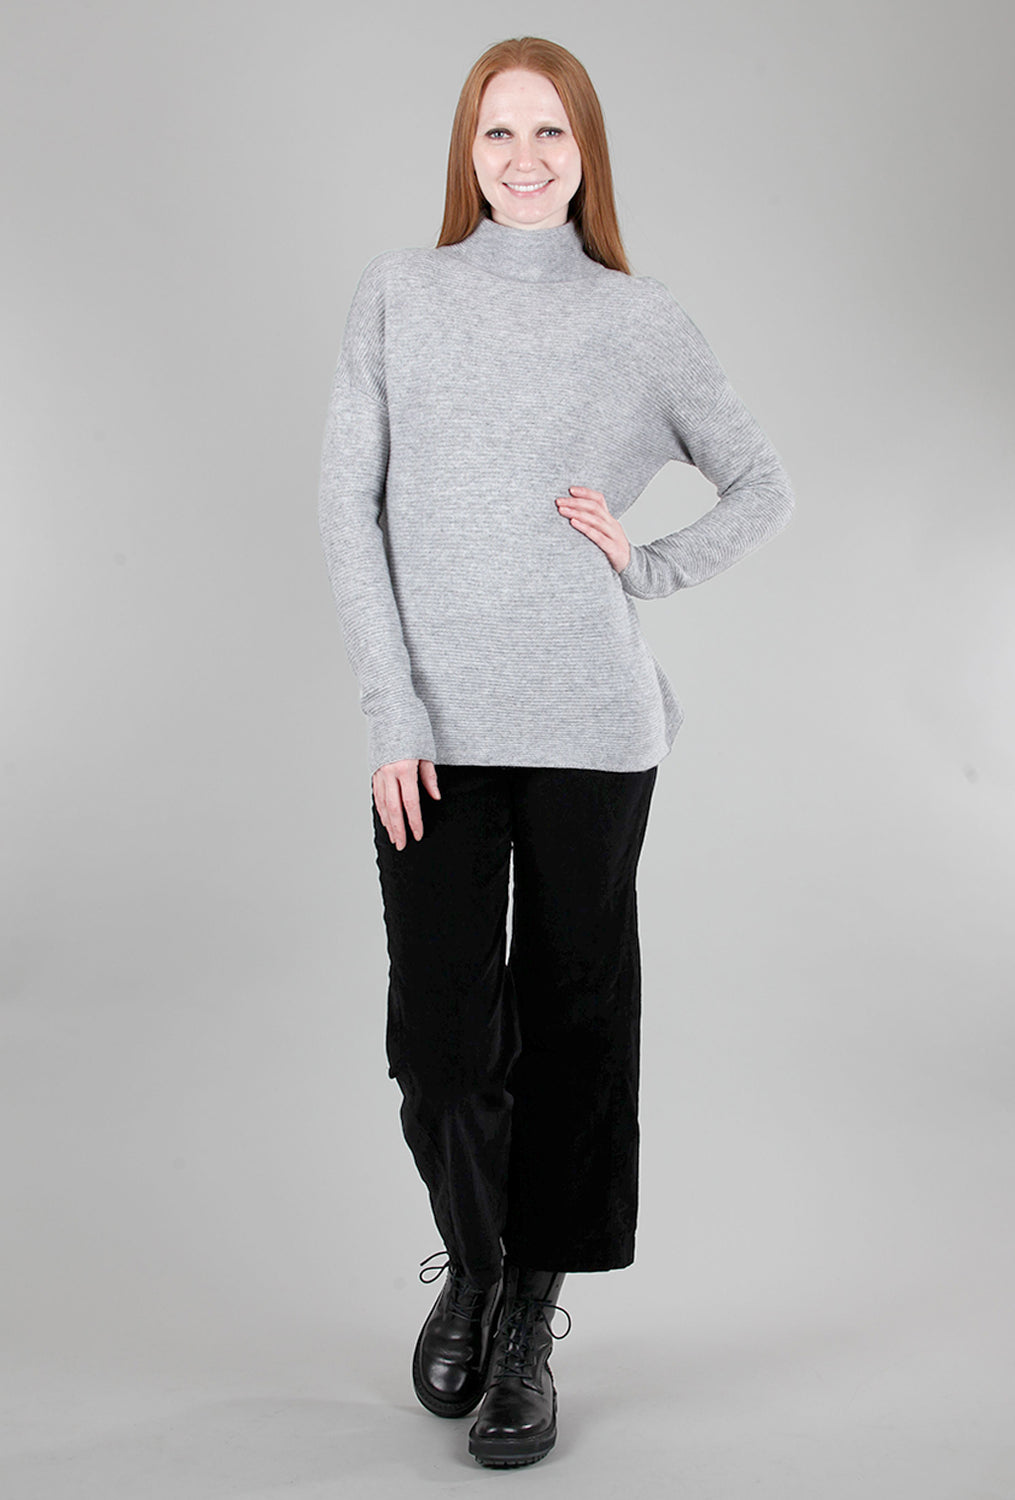 Kinross Cashmere Textured Slouchy Funnel Sweater, Sterling Gray 